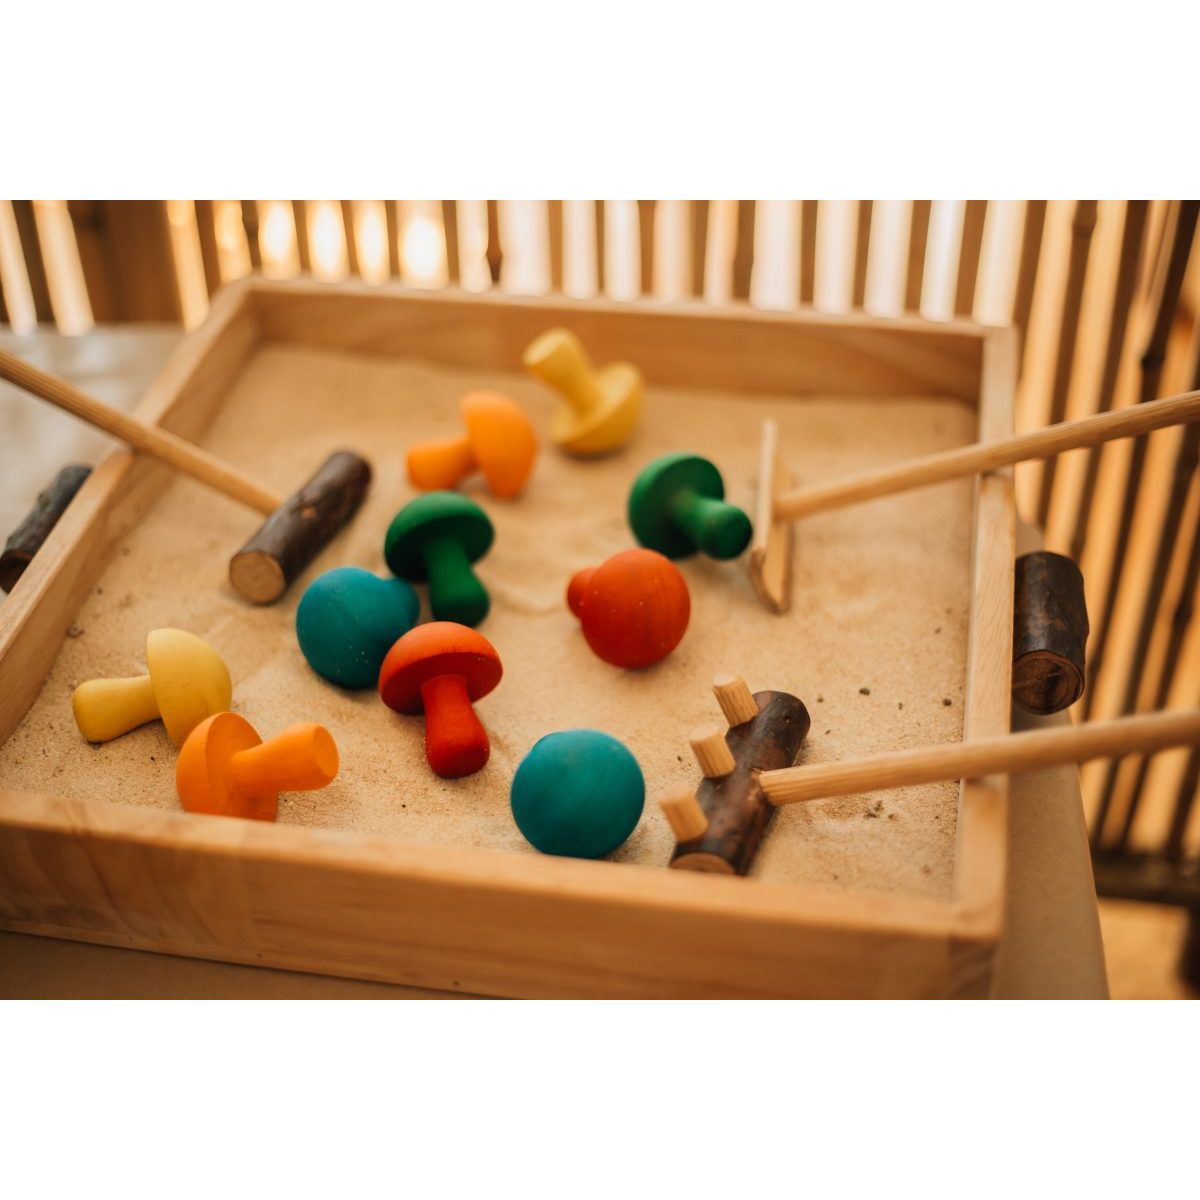 Sand tray and play set Wooden Toy